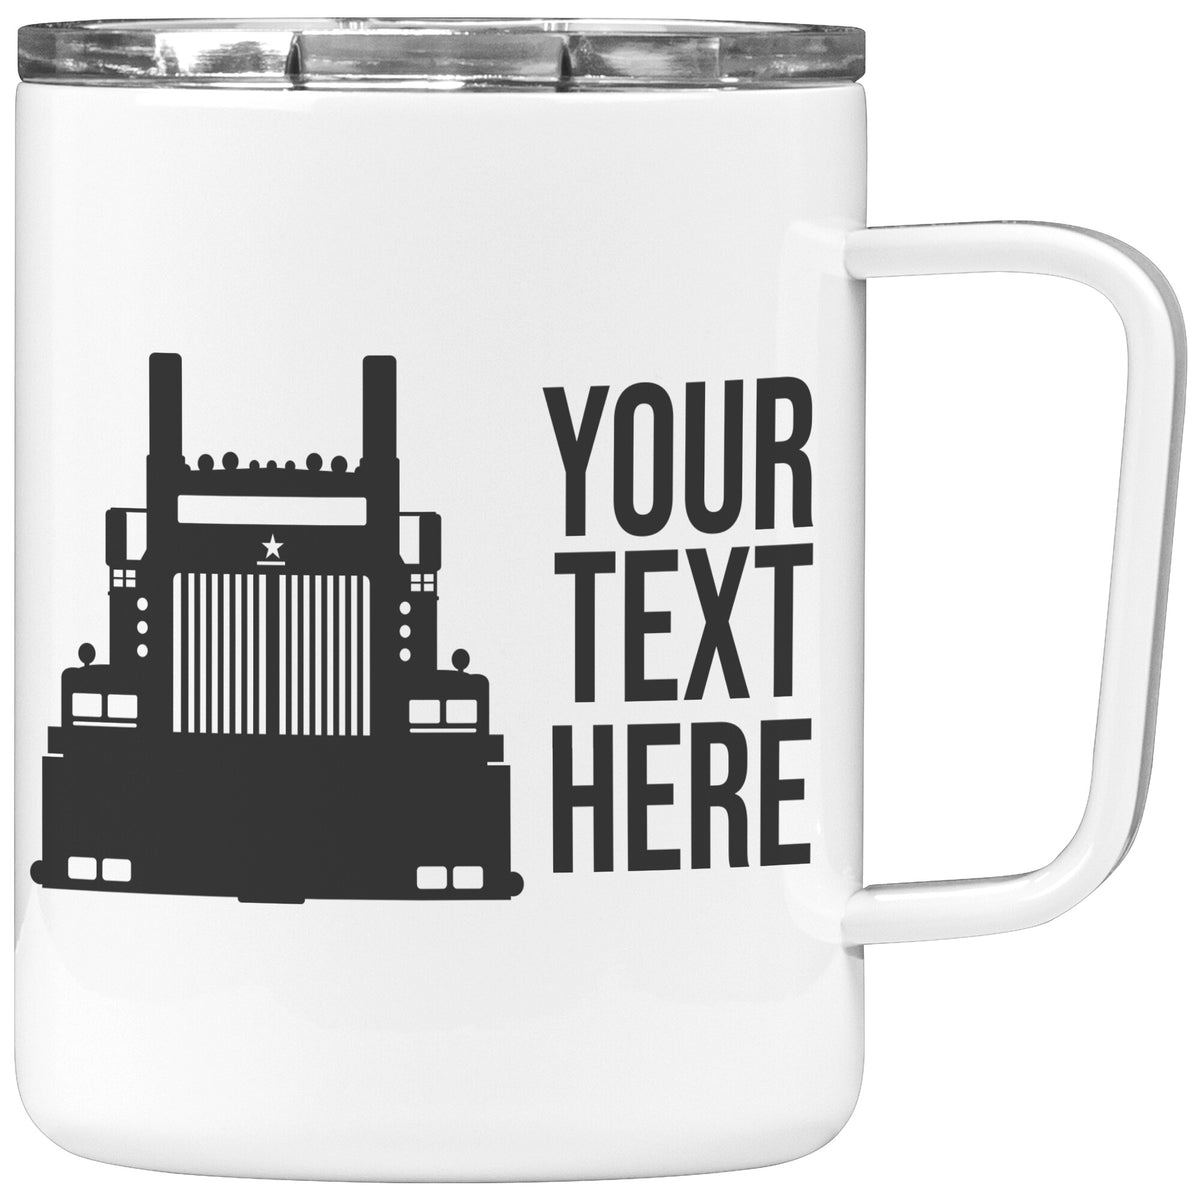 Western Star Your Text Here 10oz Insulated Coffee Mug Free